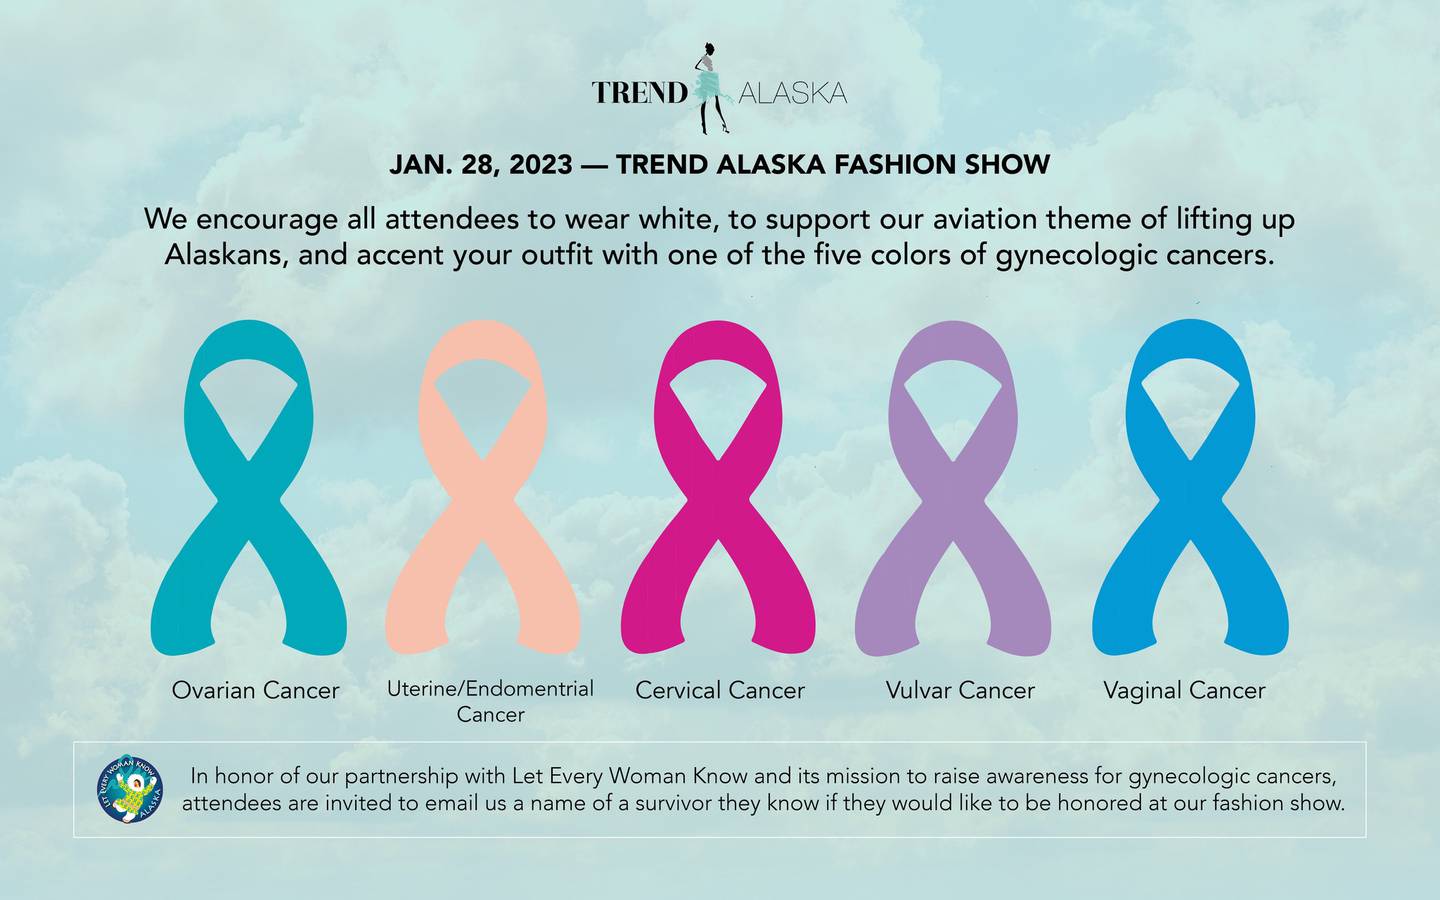 A graphic with the five colors that represent different types of gynecologic cancer